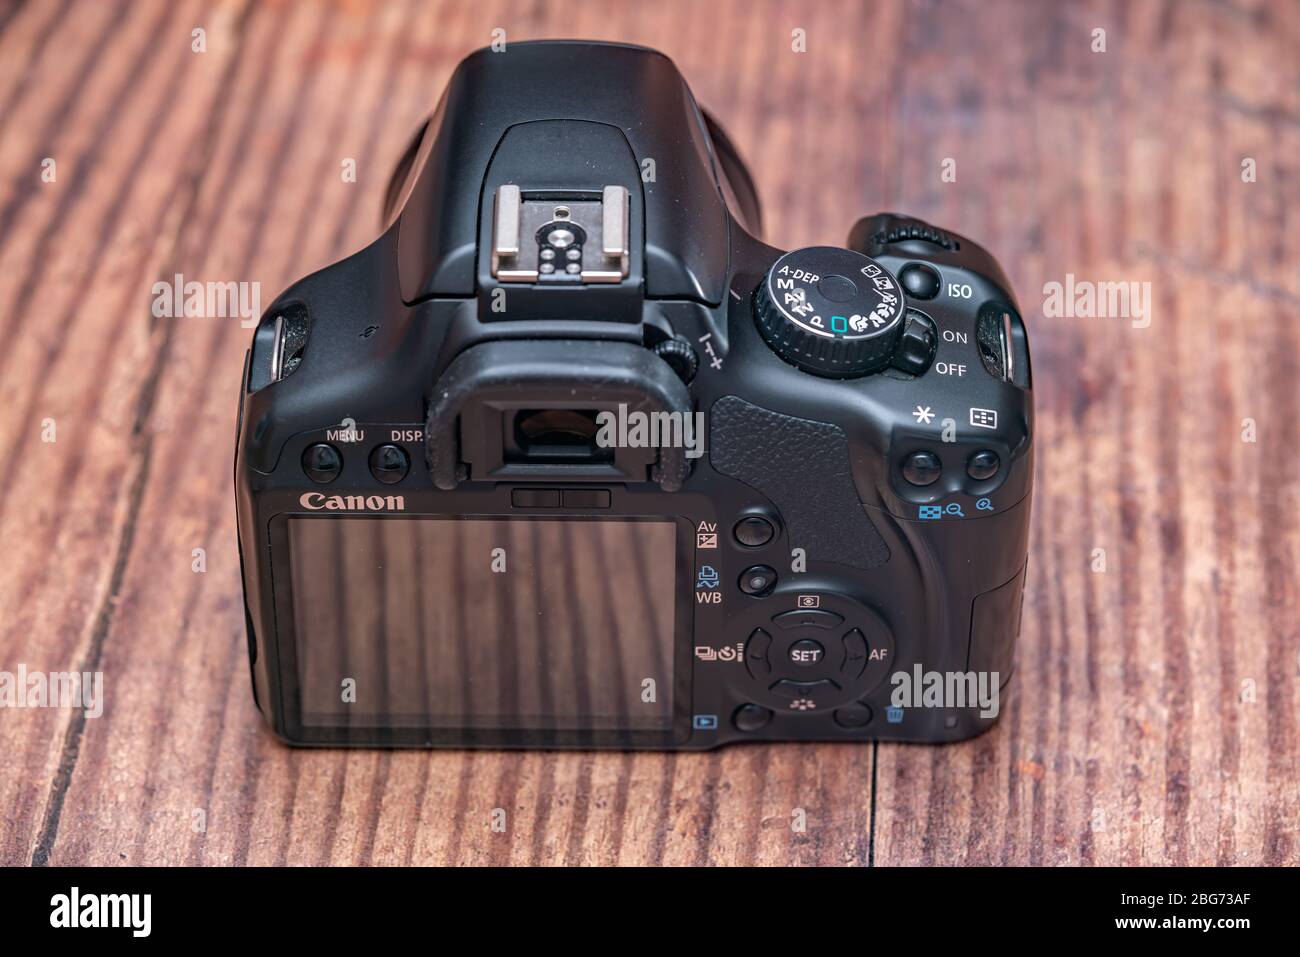 Norwich, Norfolk, UK – April 19 2020. A rear view of a classic Canon EOS dslr camera on a wooden background Stock Photo